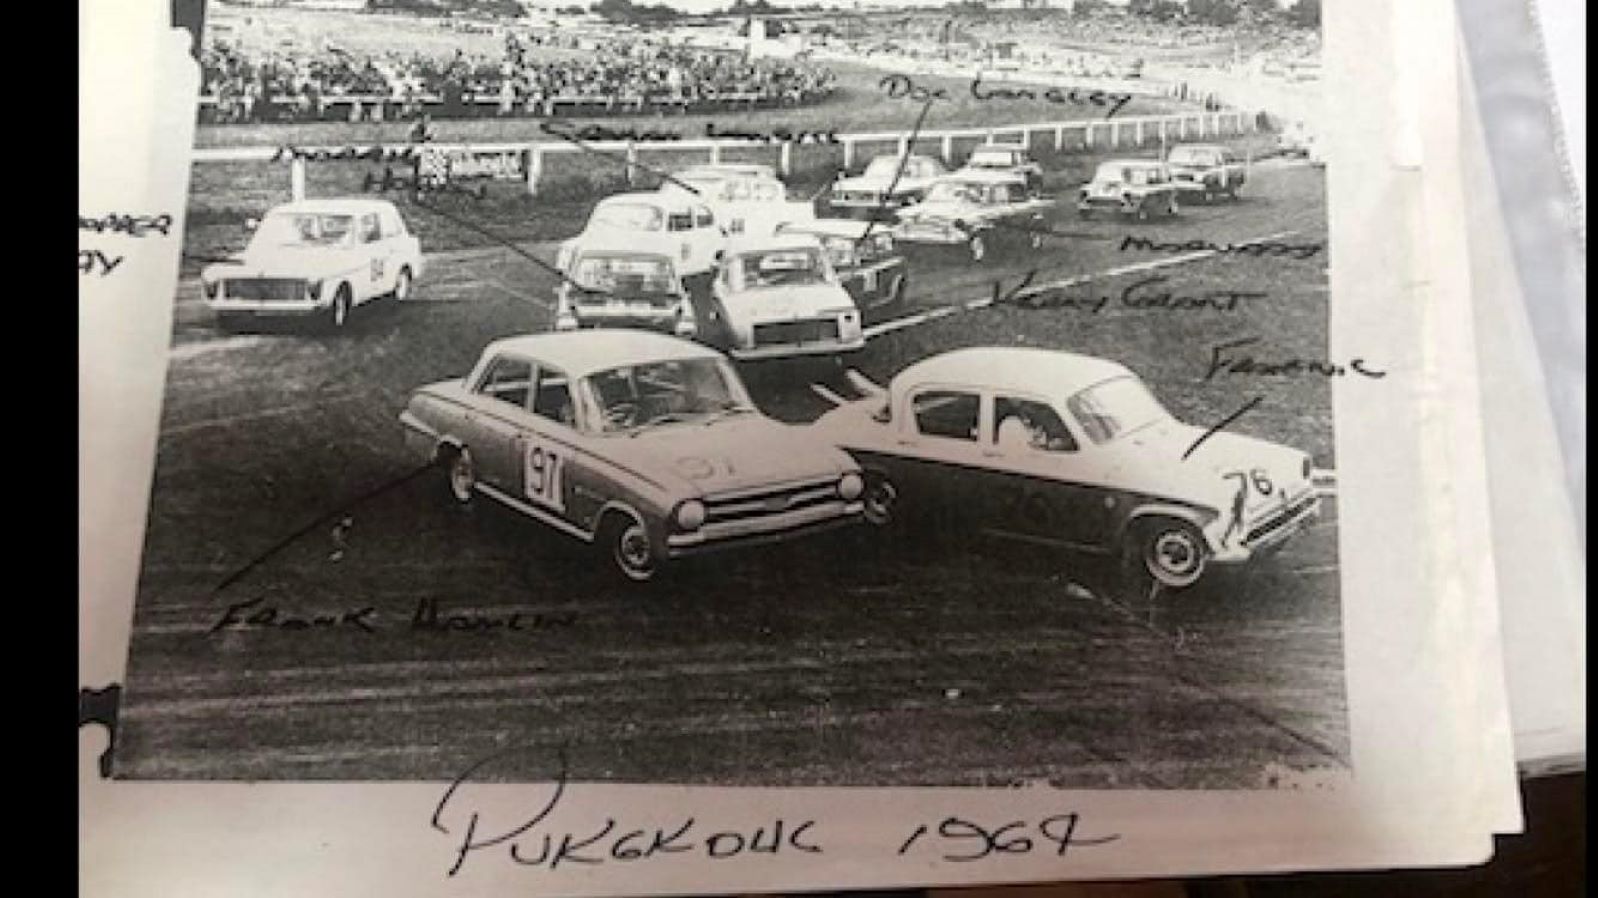 Name:  Pukekohe 1964 #022 1964 Saloon Car field at the Elbow - GP meeting Q 172 kb arch HVRA Bruce Dyer.jpg
Views: 340
Size:  172.4 KB